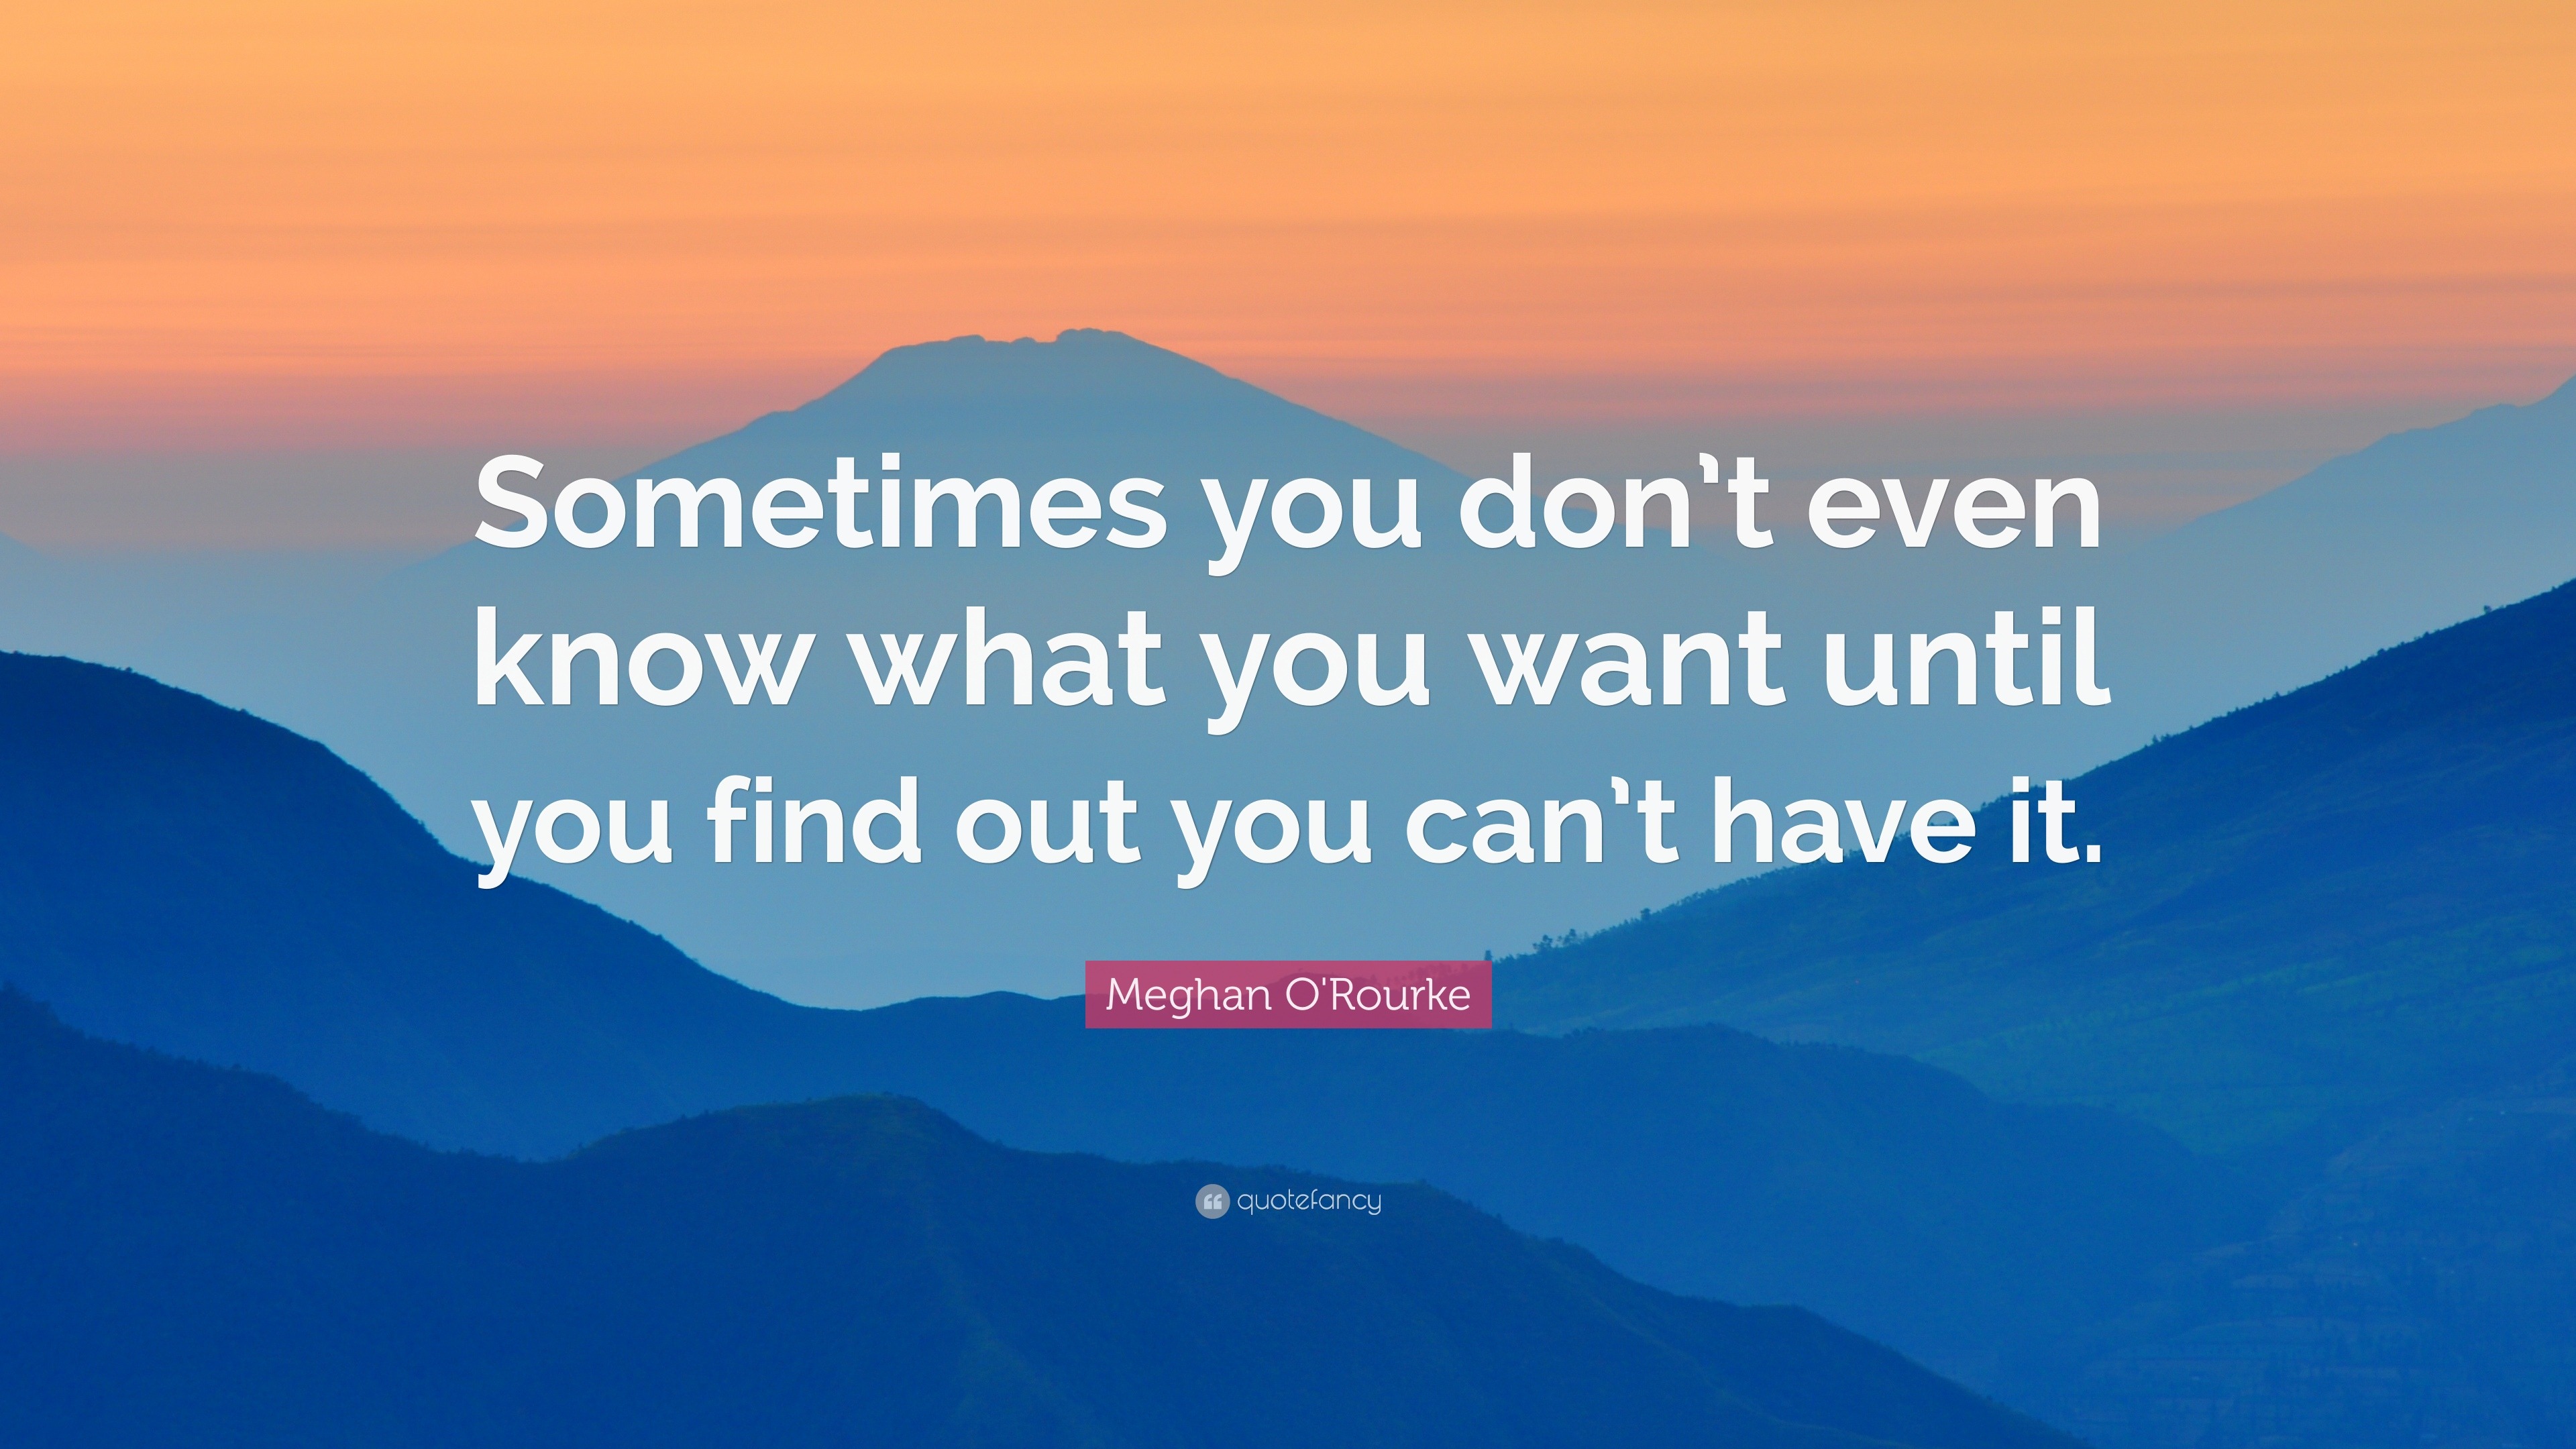 Meghan O'Rourke Quote: “Sometimes you don’t even know what you want ...